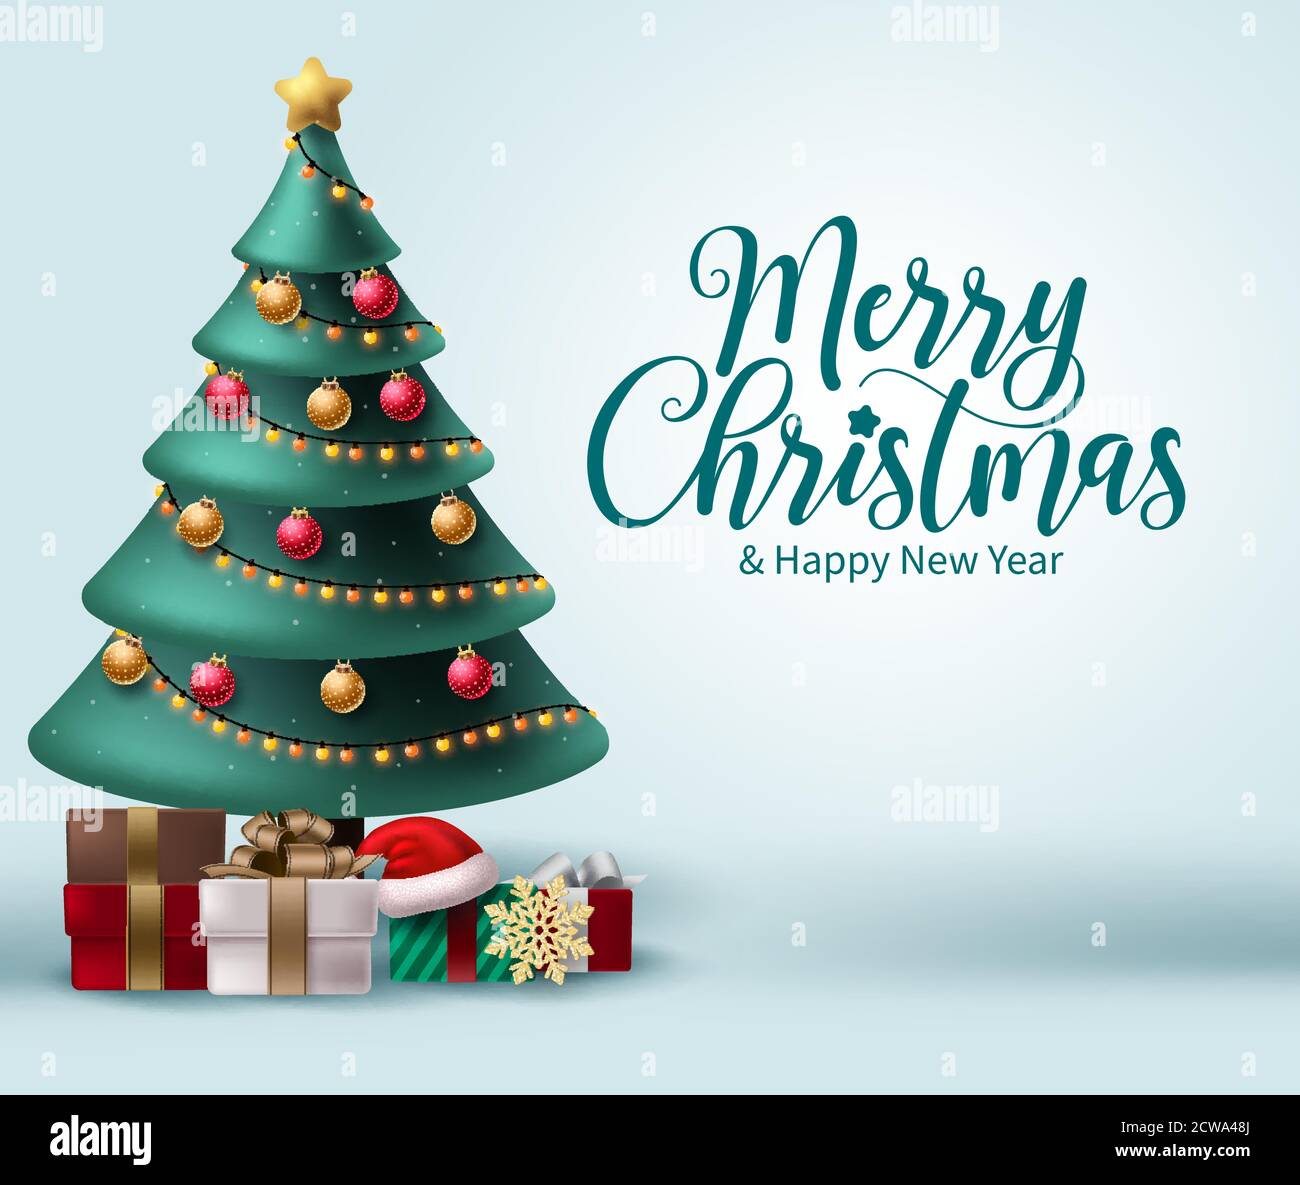 Merry christmas vector background design. Christmas greeting in ...